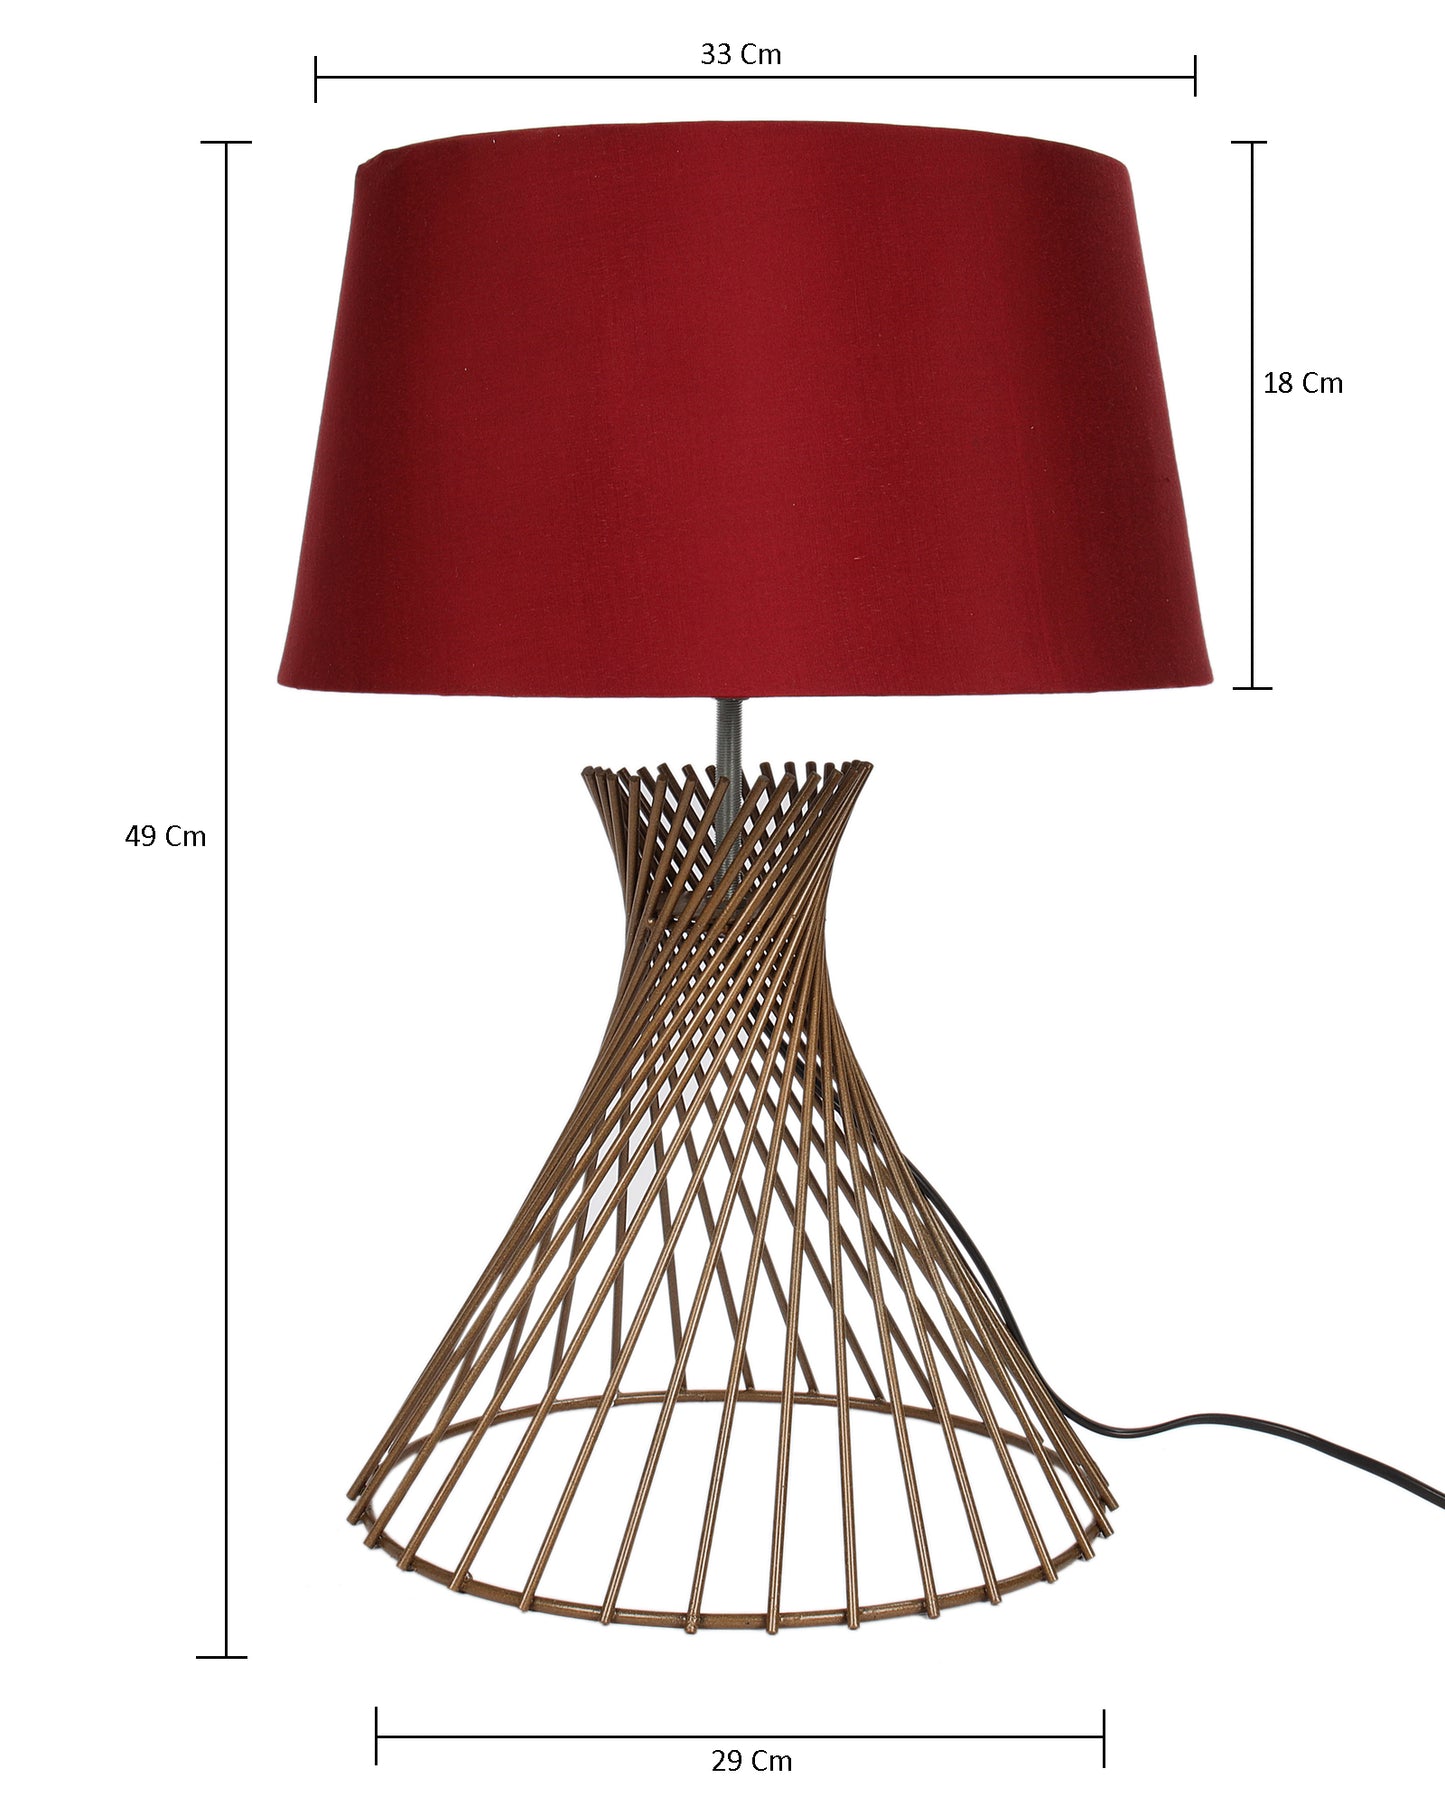 Modern Table Lamps, Spiral Metal Wire Golden Base with Fabric Lampshade for Home Office Cafe Restaurant